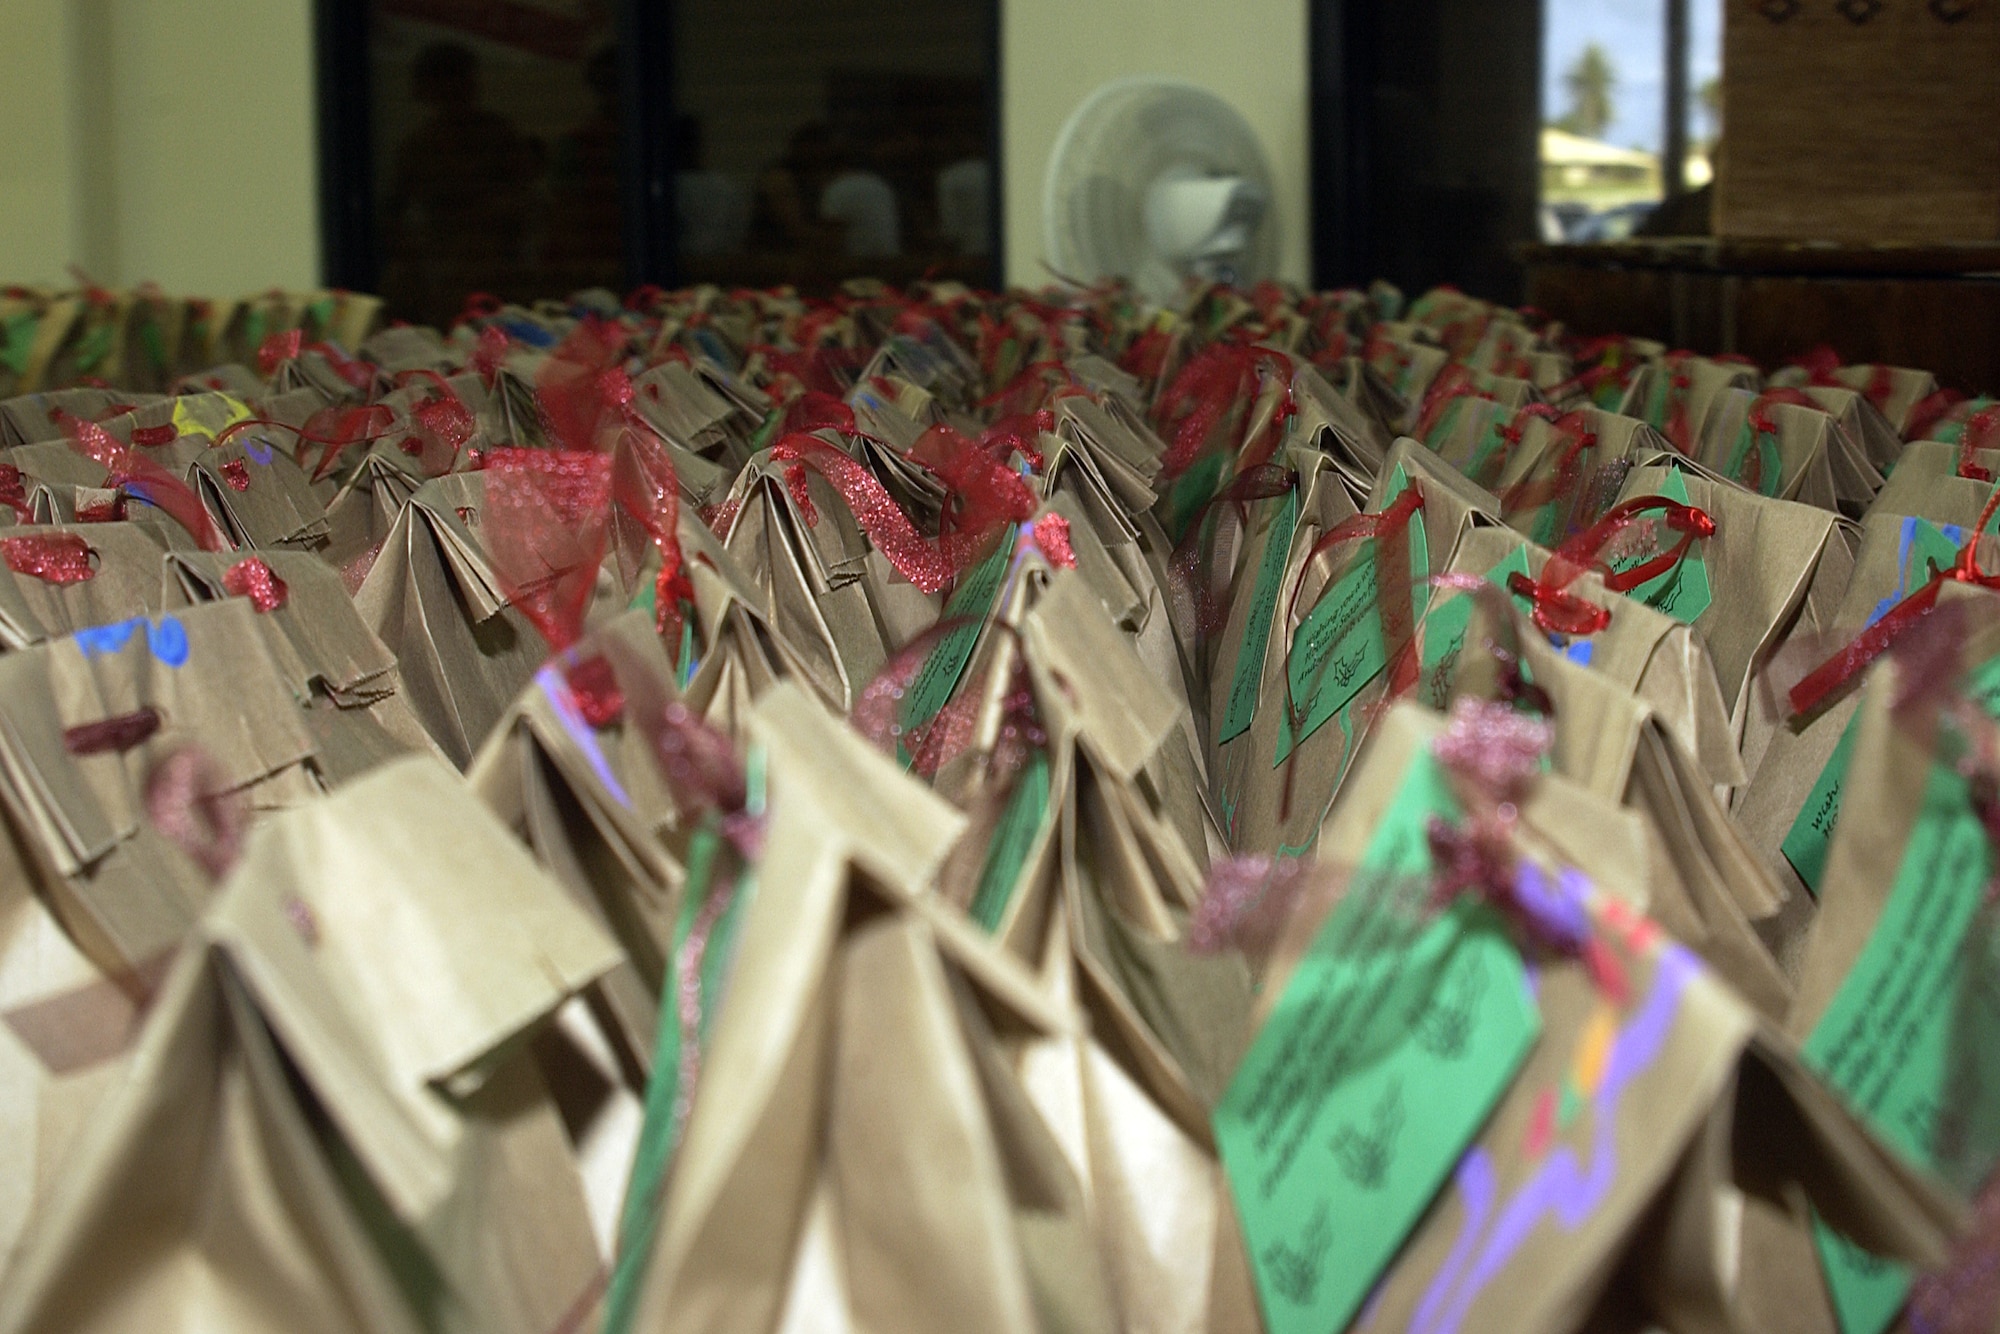 More than 800 goodie bags were packed by volunteers during the Cookie Caper event held Dec. 17. The purpose Cookie Caper is to bring a "taste of home" to Andersen Airmen away from their families during the holidays. (U.S. Air Force photo/Airman 1st Class Carissa Morgan)